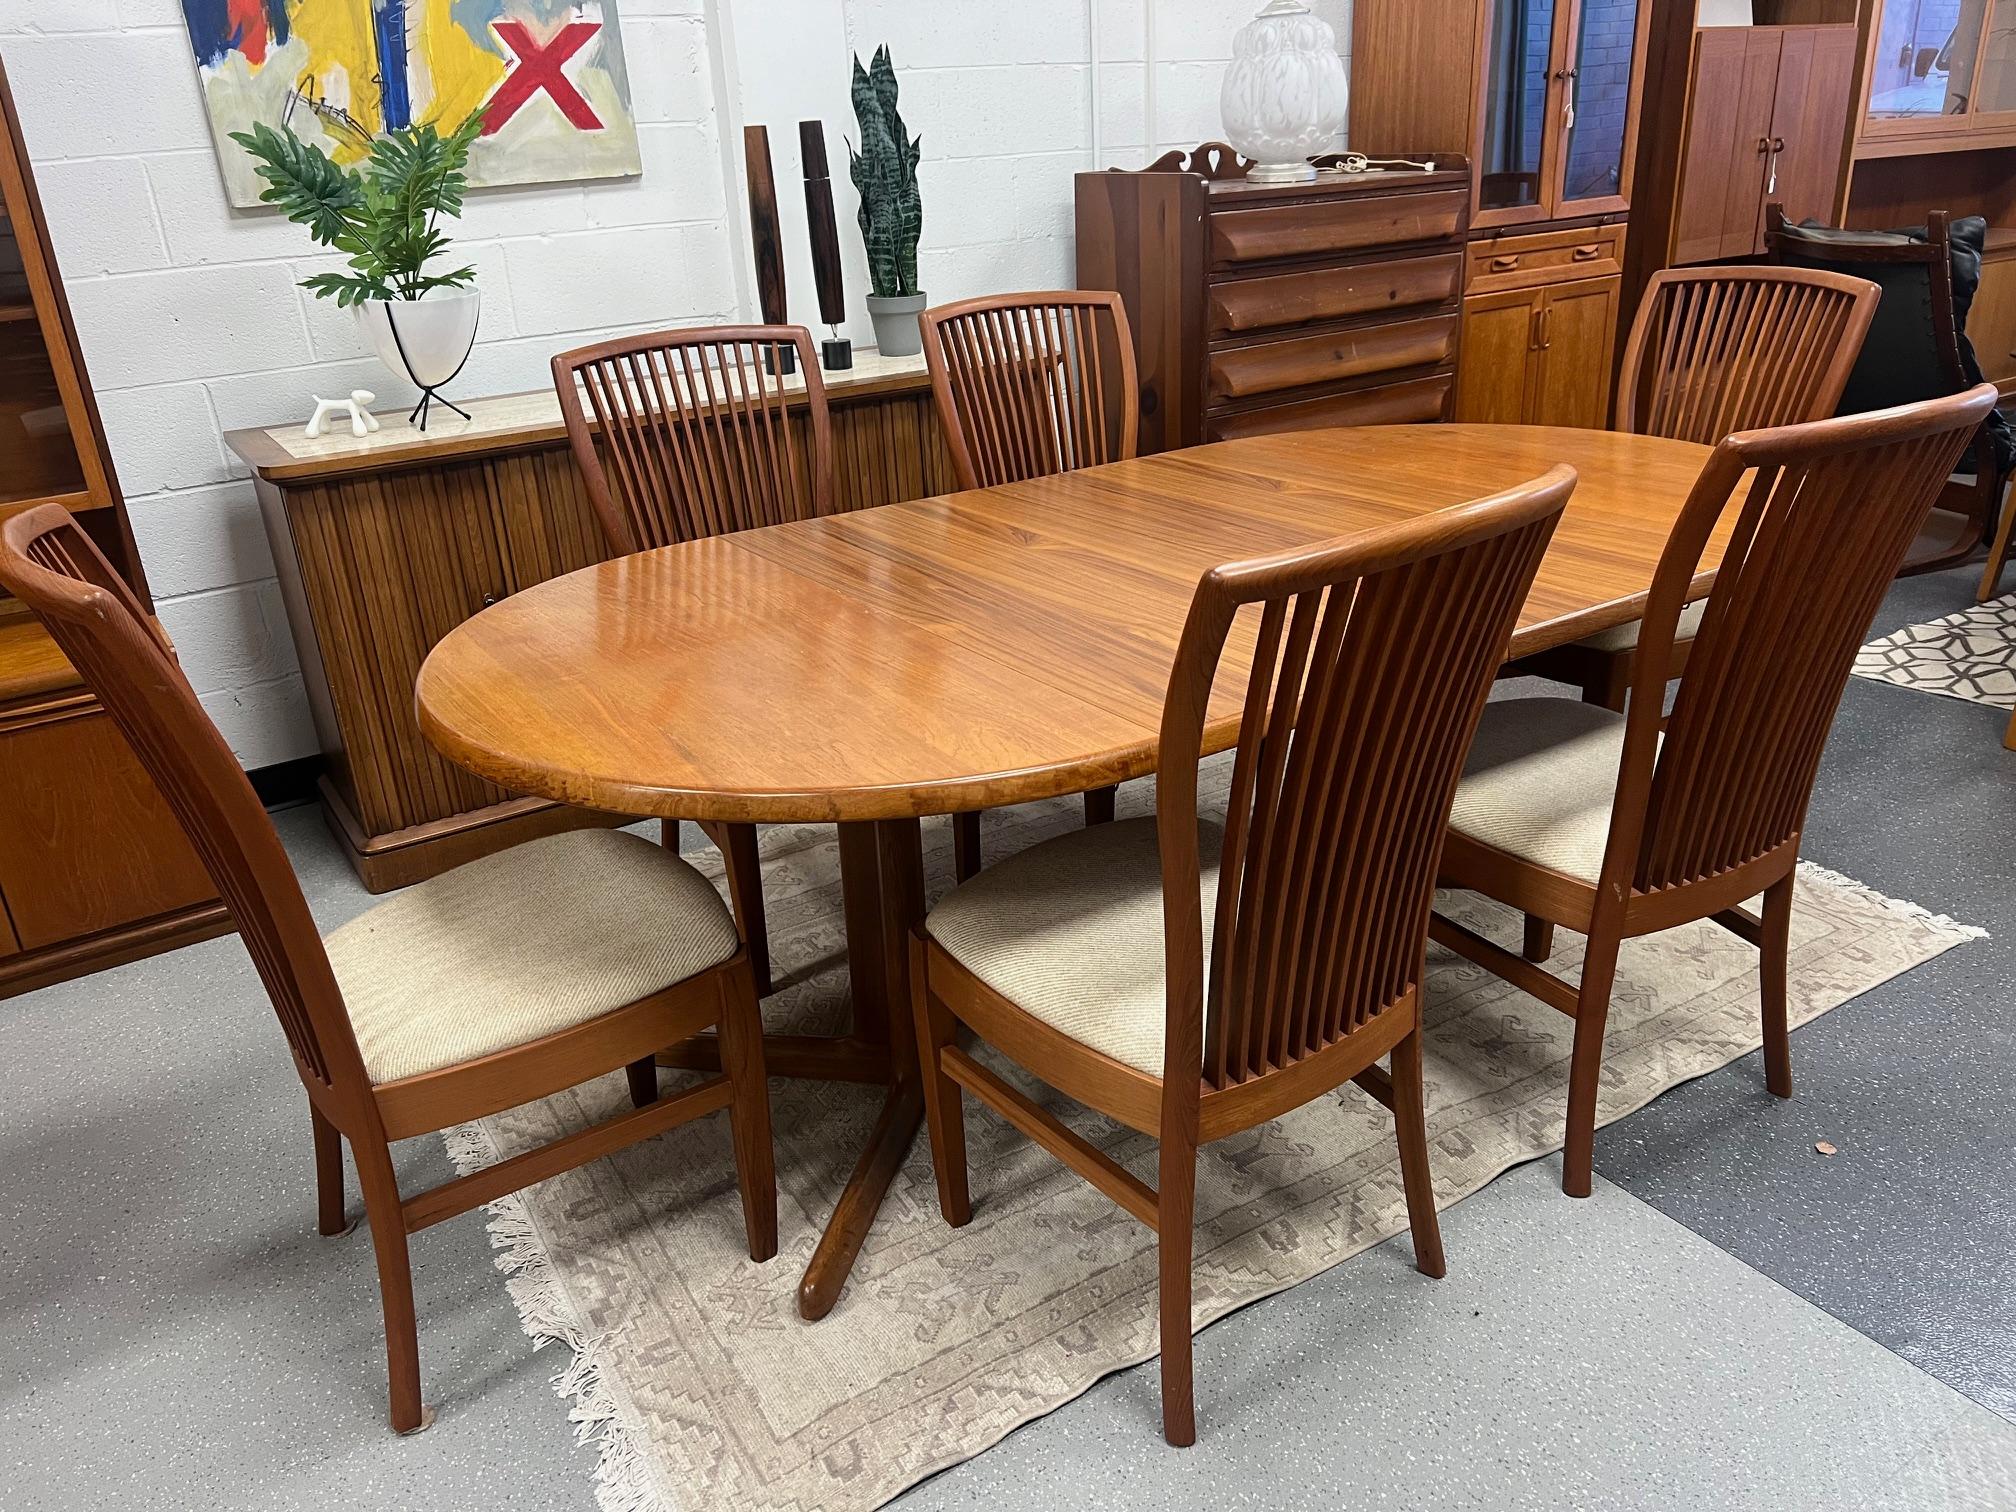 Set Of 6 Mid Century Modern Teak Dining Chairs By Sun Cabinet 10